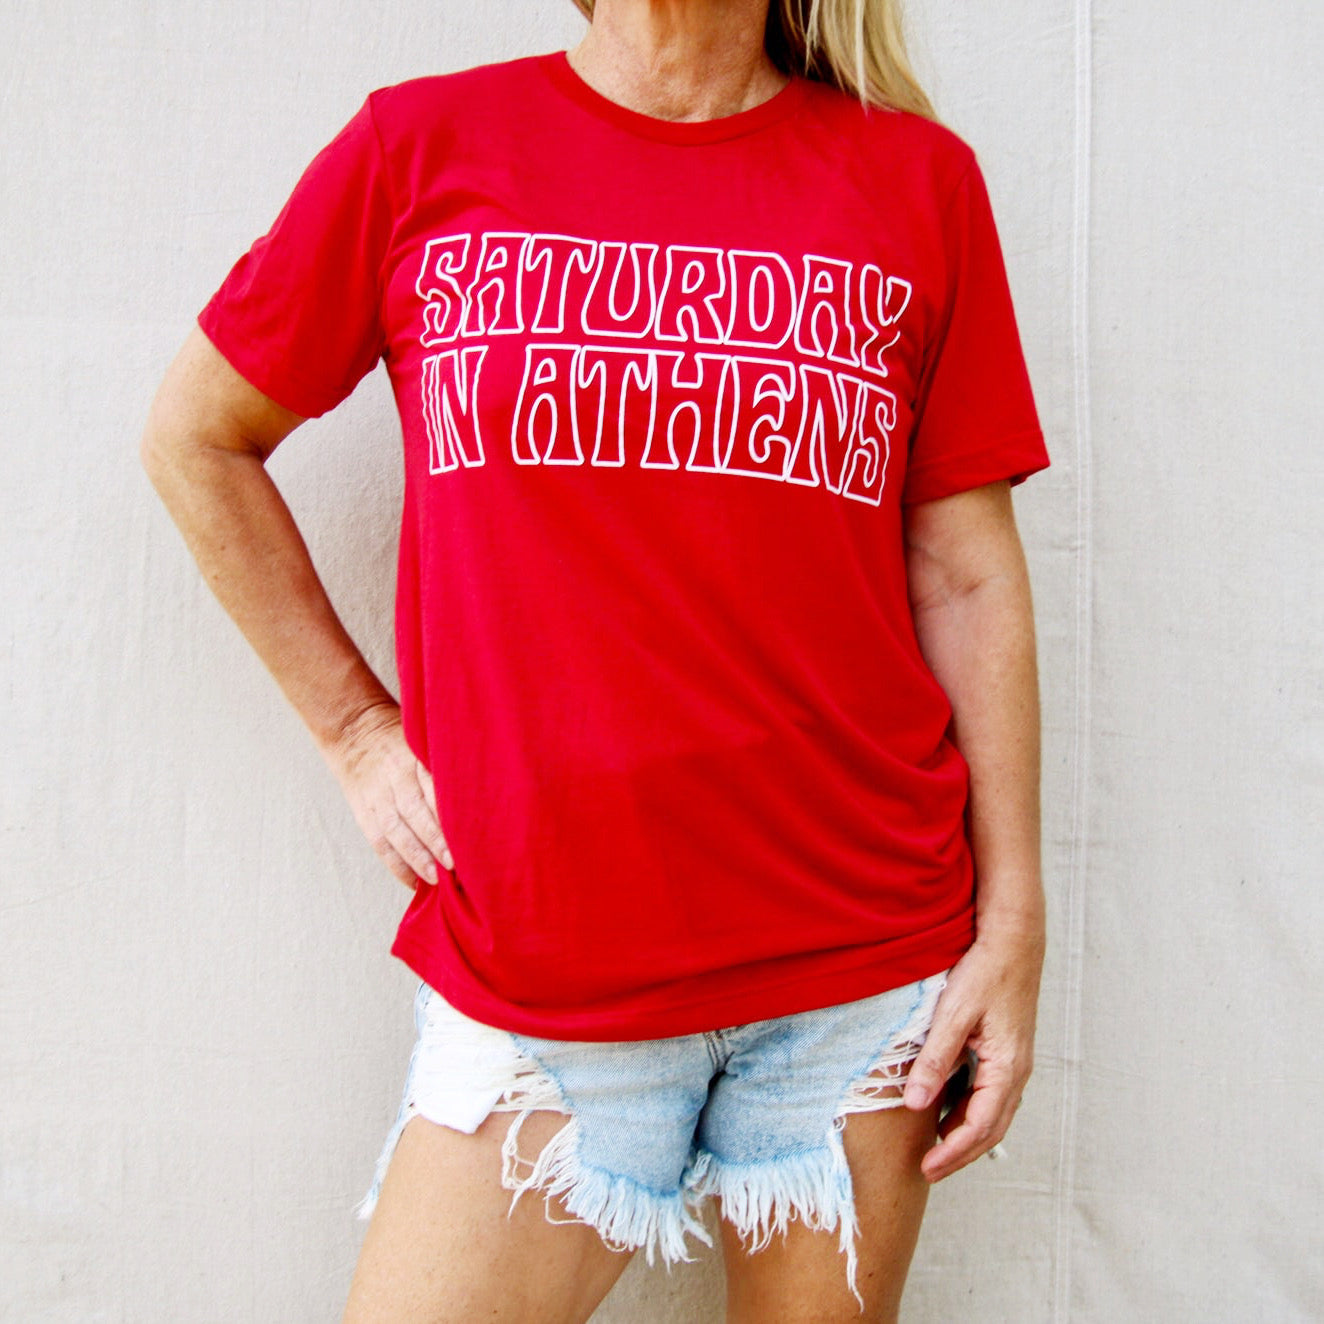 saturday in athens unisex graphic tee red with white letters